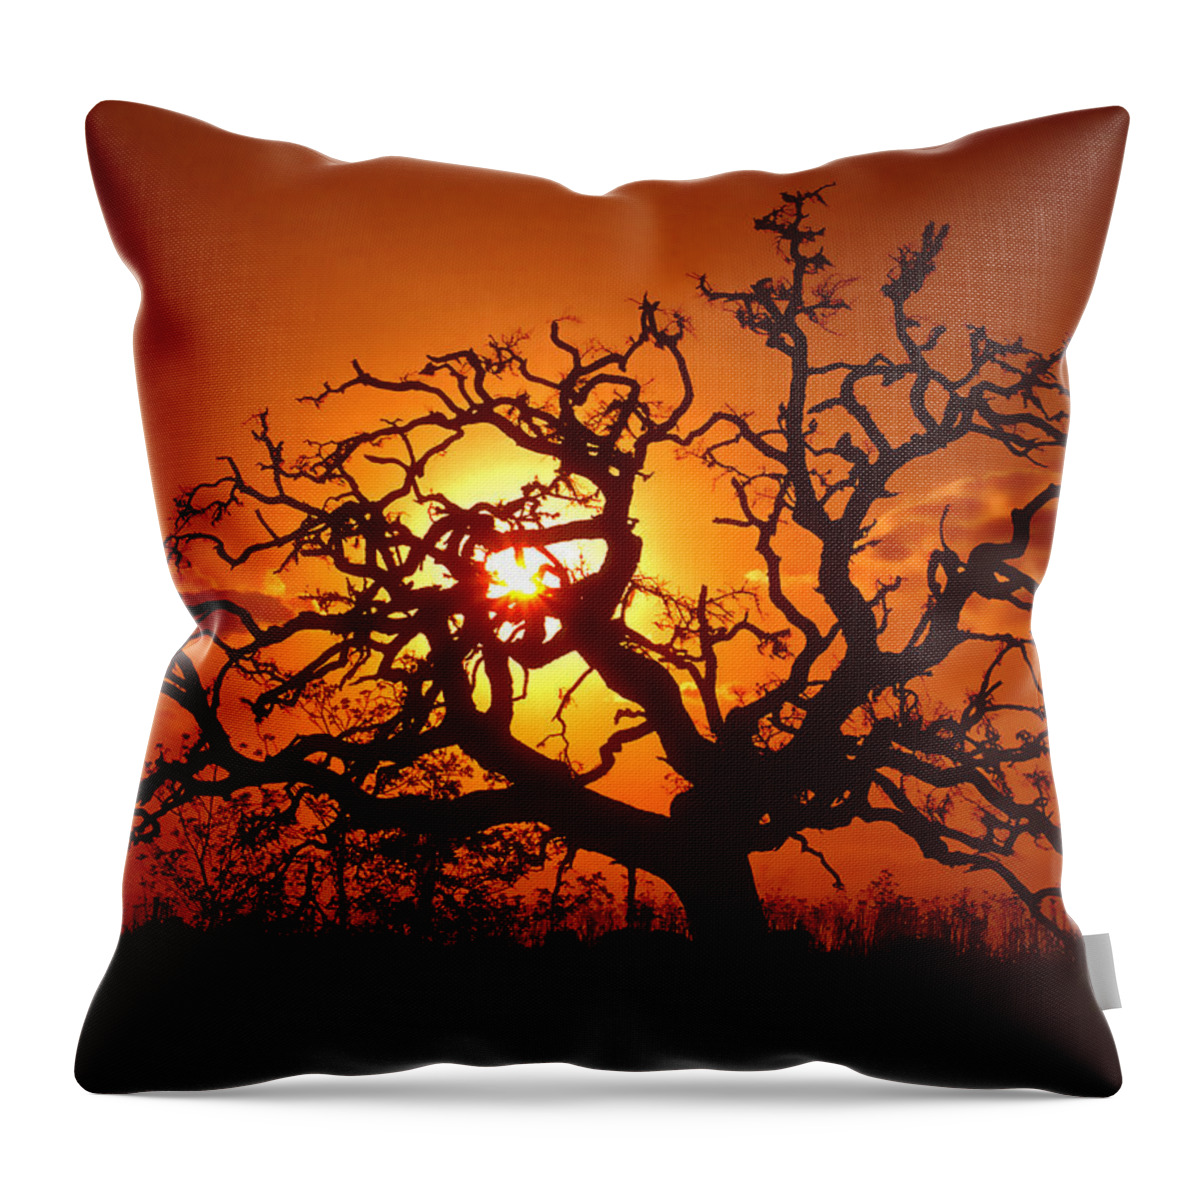 Spooky Throw Pillow featuring the photograph Spooky Tree by Stephen Anderson